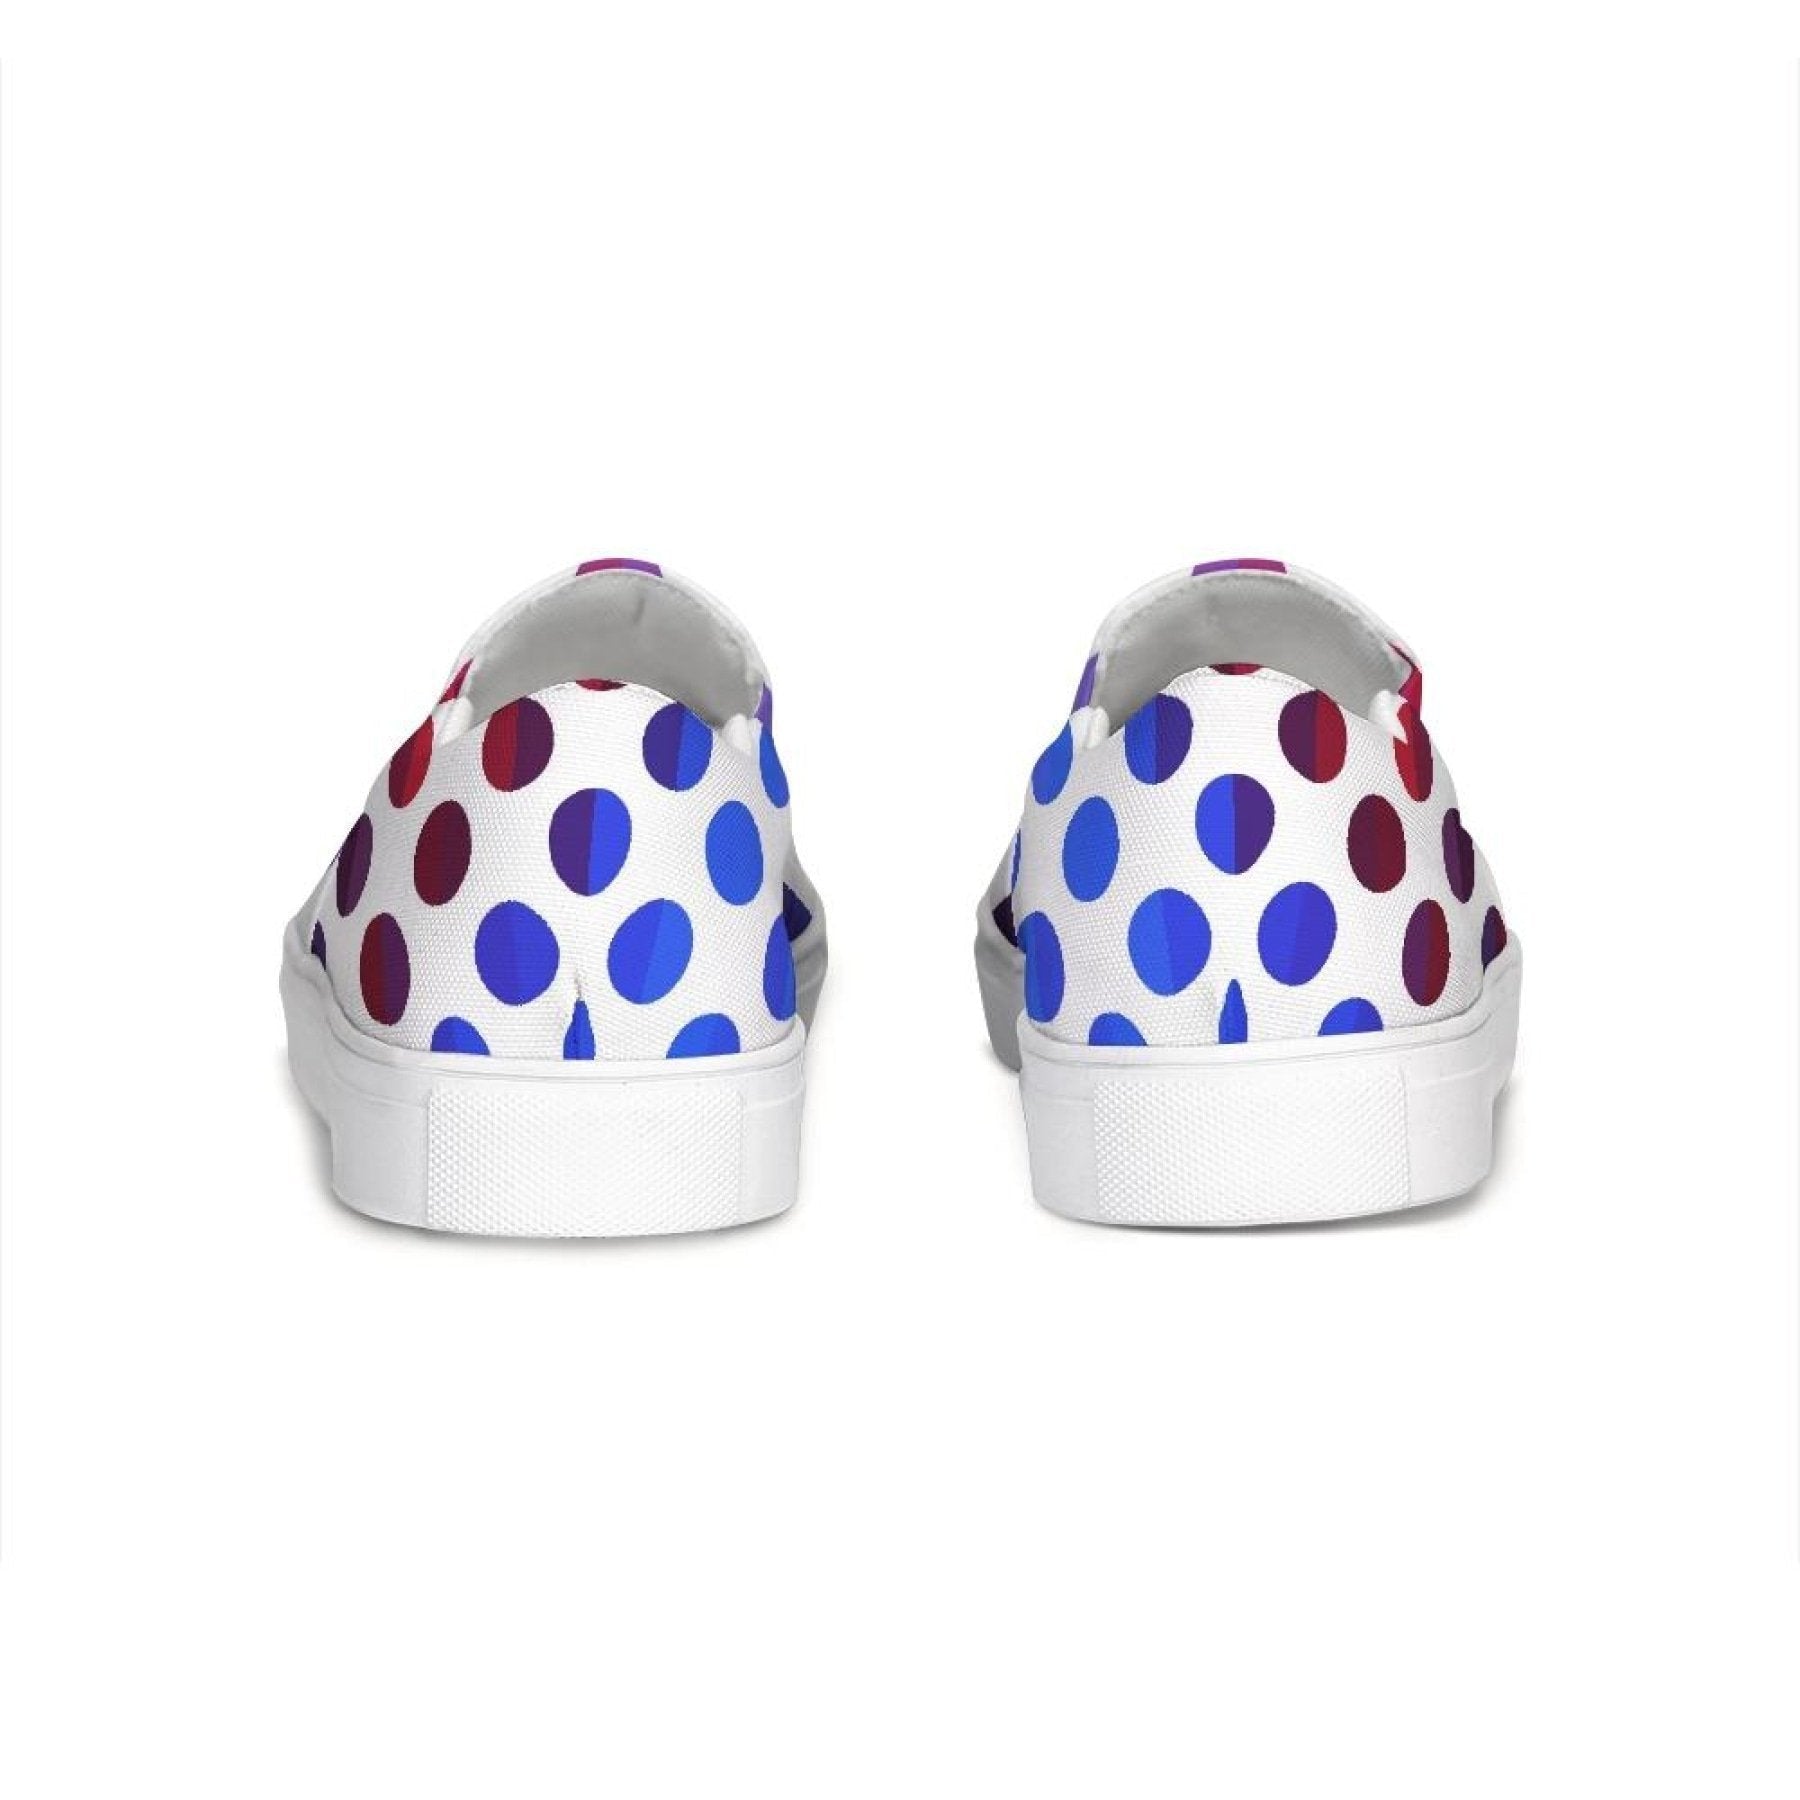 Athletic Sneakers, Low Cut Polka Dot Canvas Slip-On Sports Shoes - KME means the very best